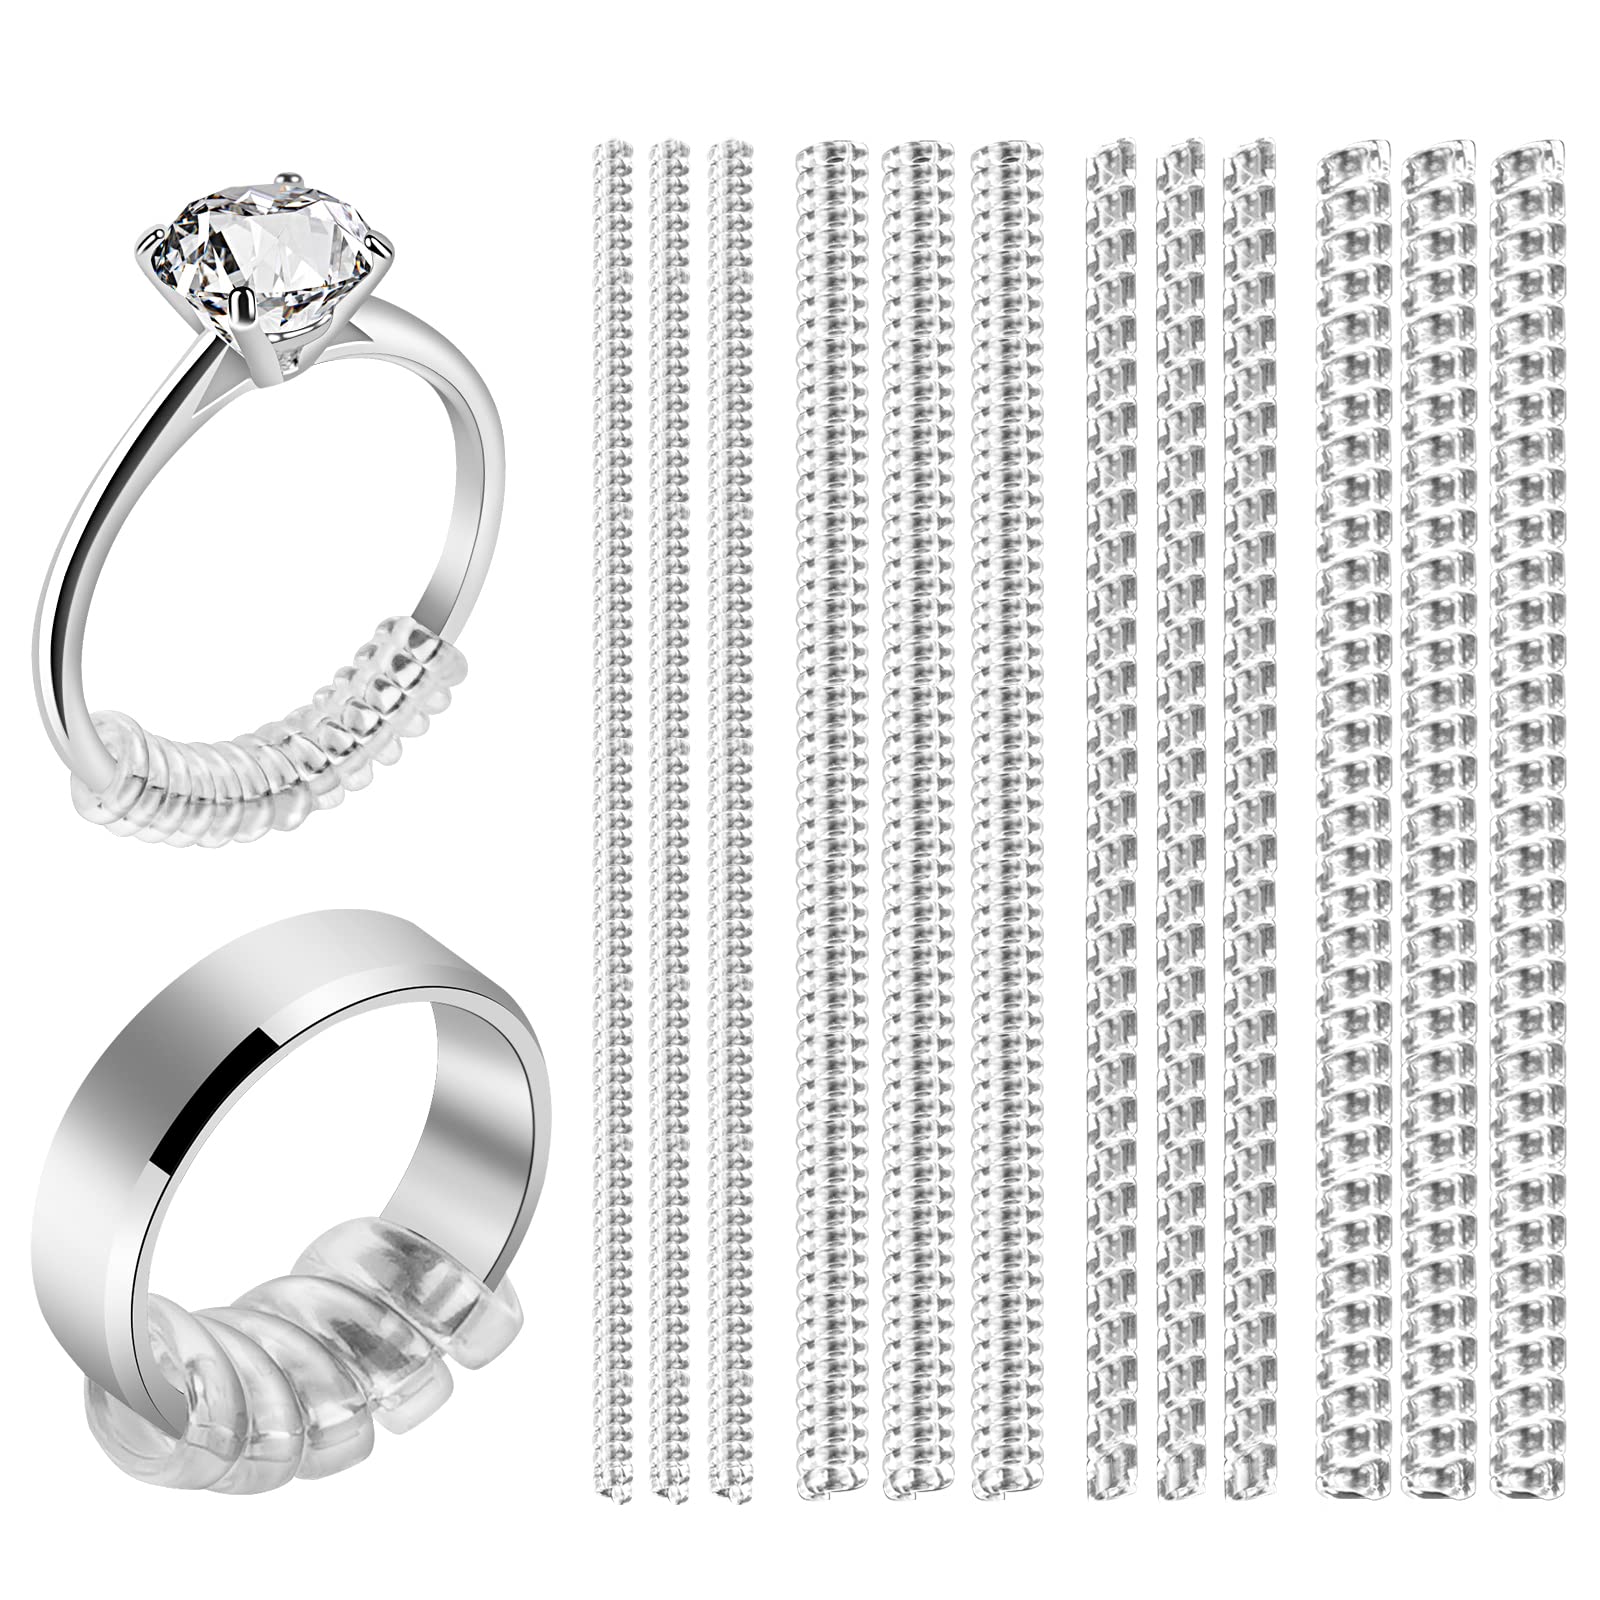 Mtlee Ring Size Adjusters for Loose Rings Ring Guard Ring Sizer